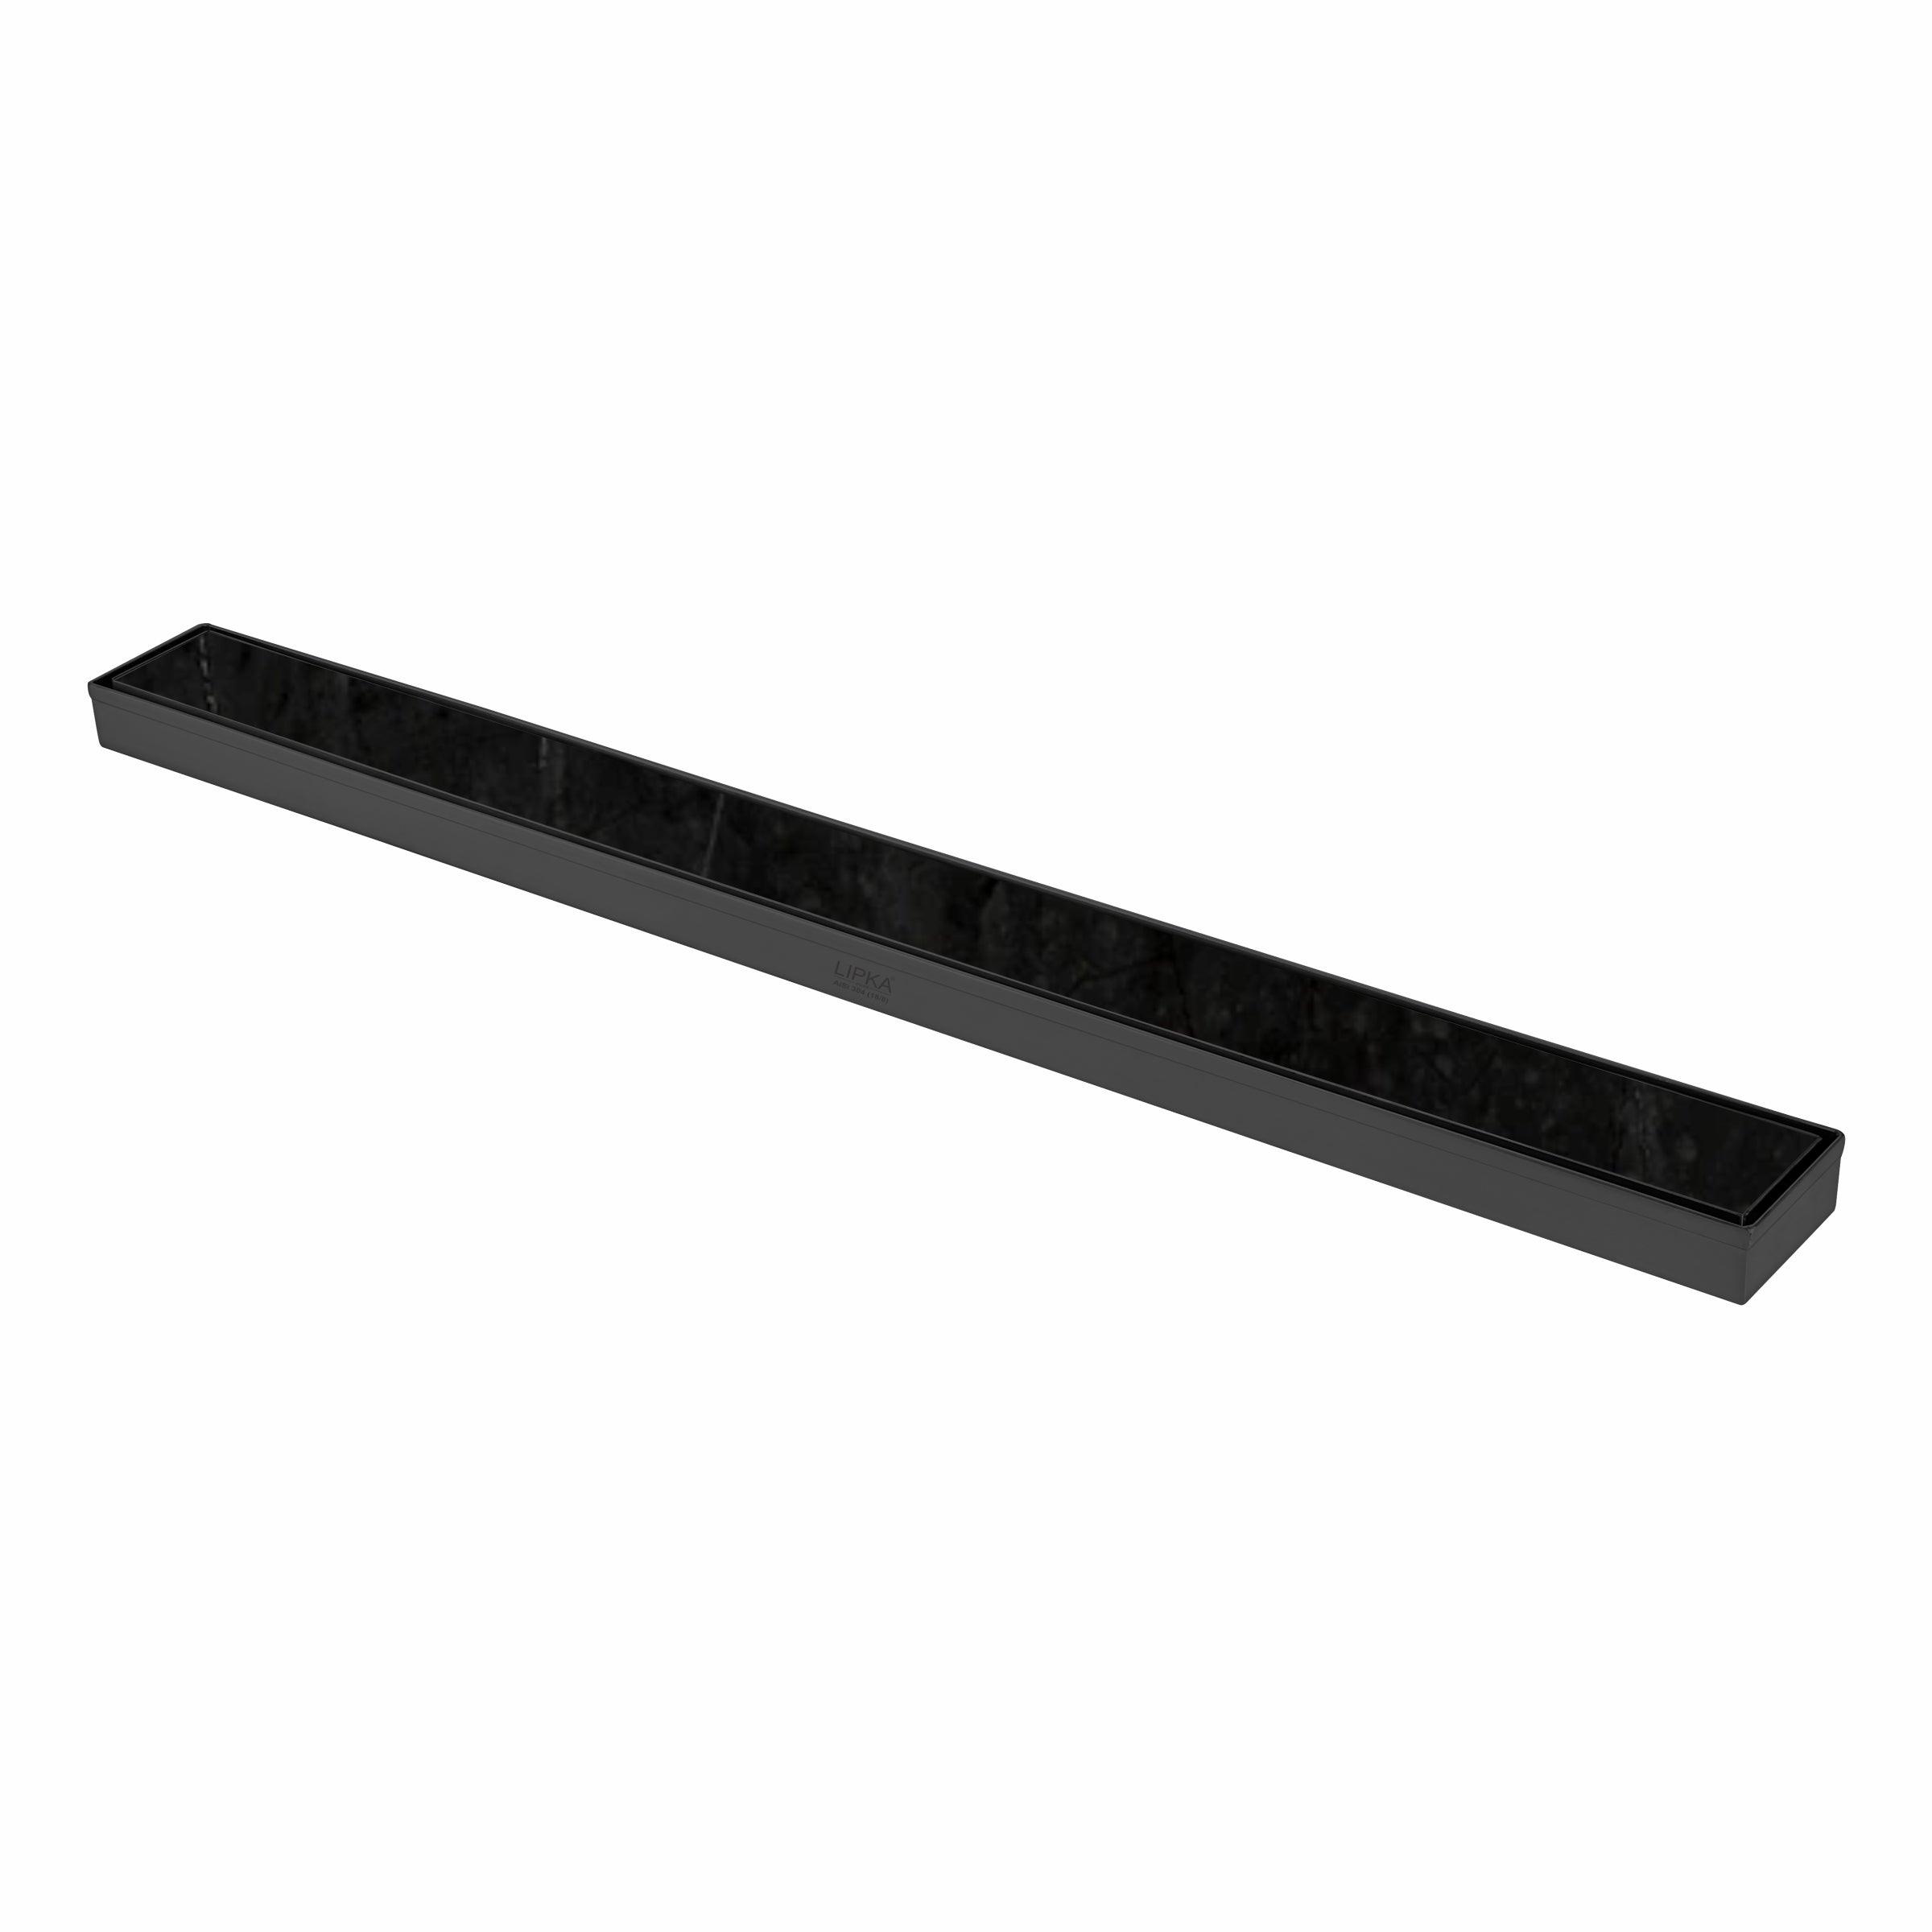 Tile Insert Shower Drain Channel - Black (32 x 2 Inches)